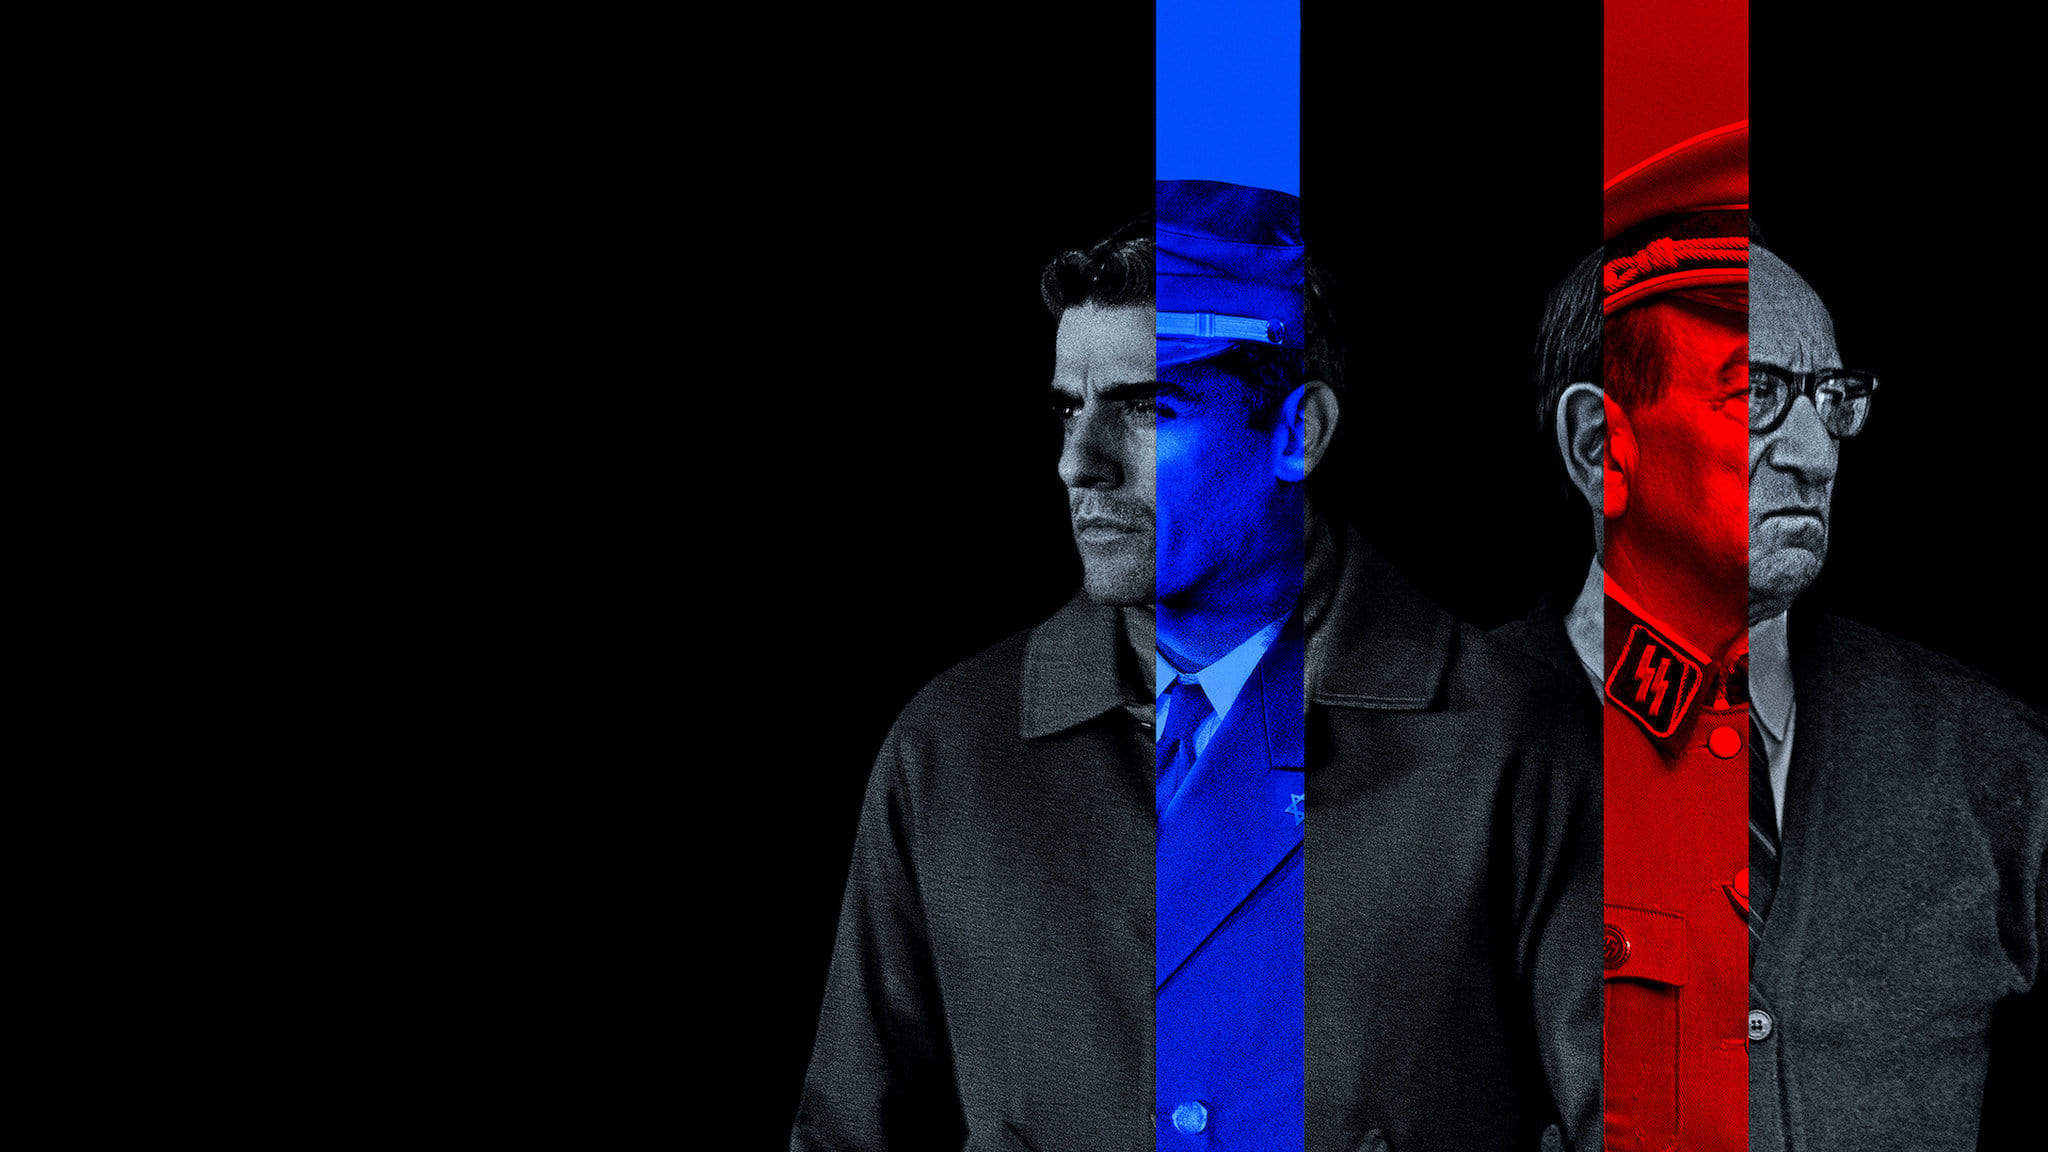 Poster Phim Chiến Dịch Cuối Cùng (Operation Finale)